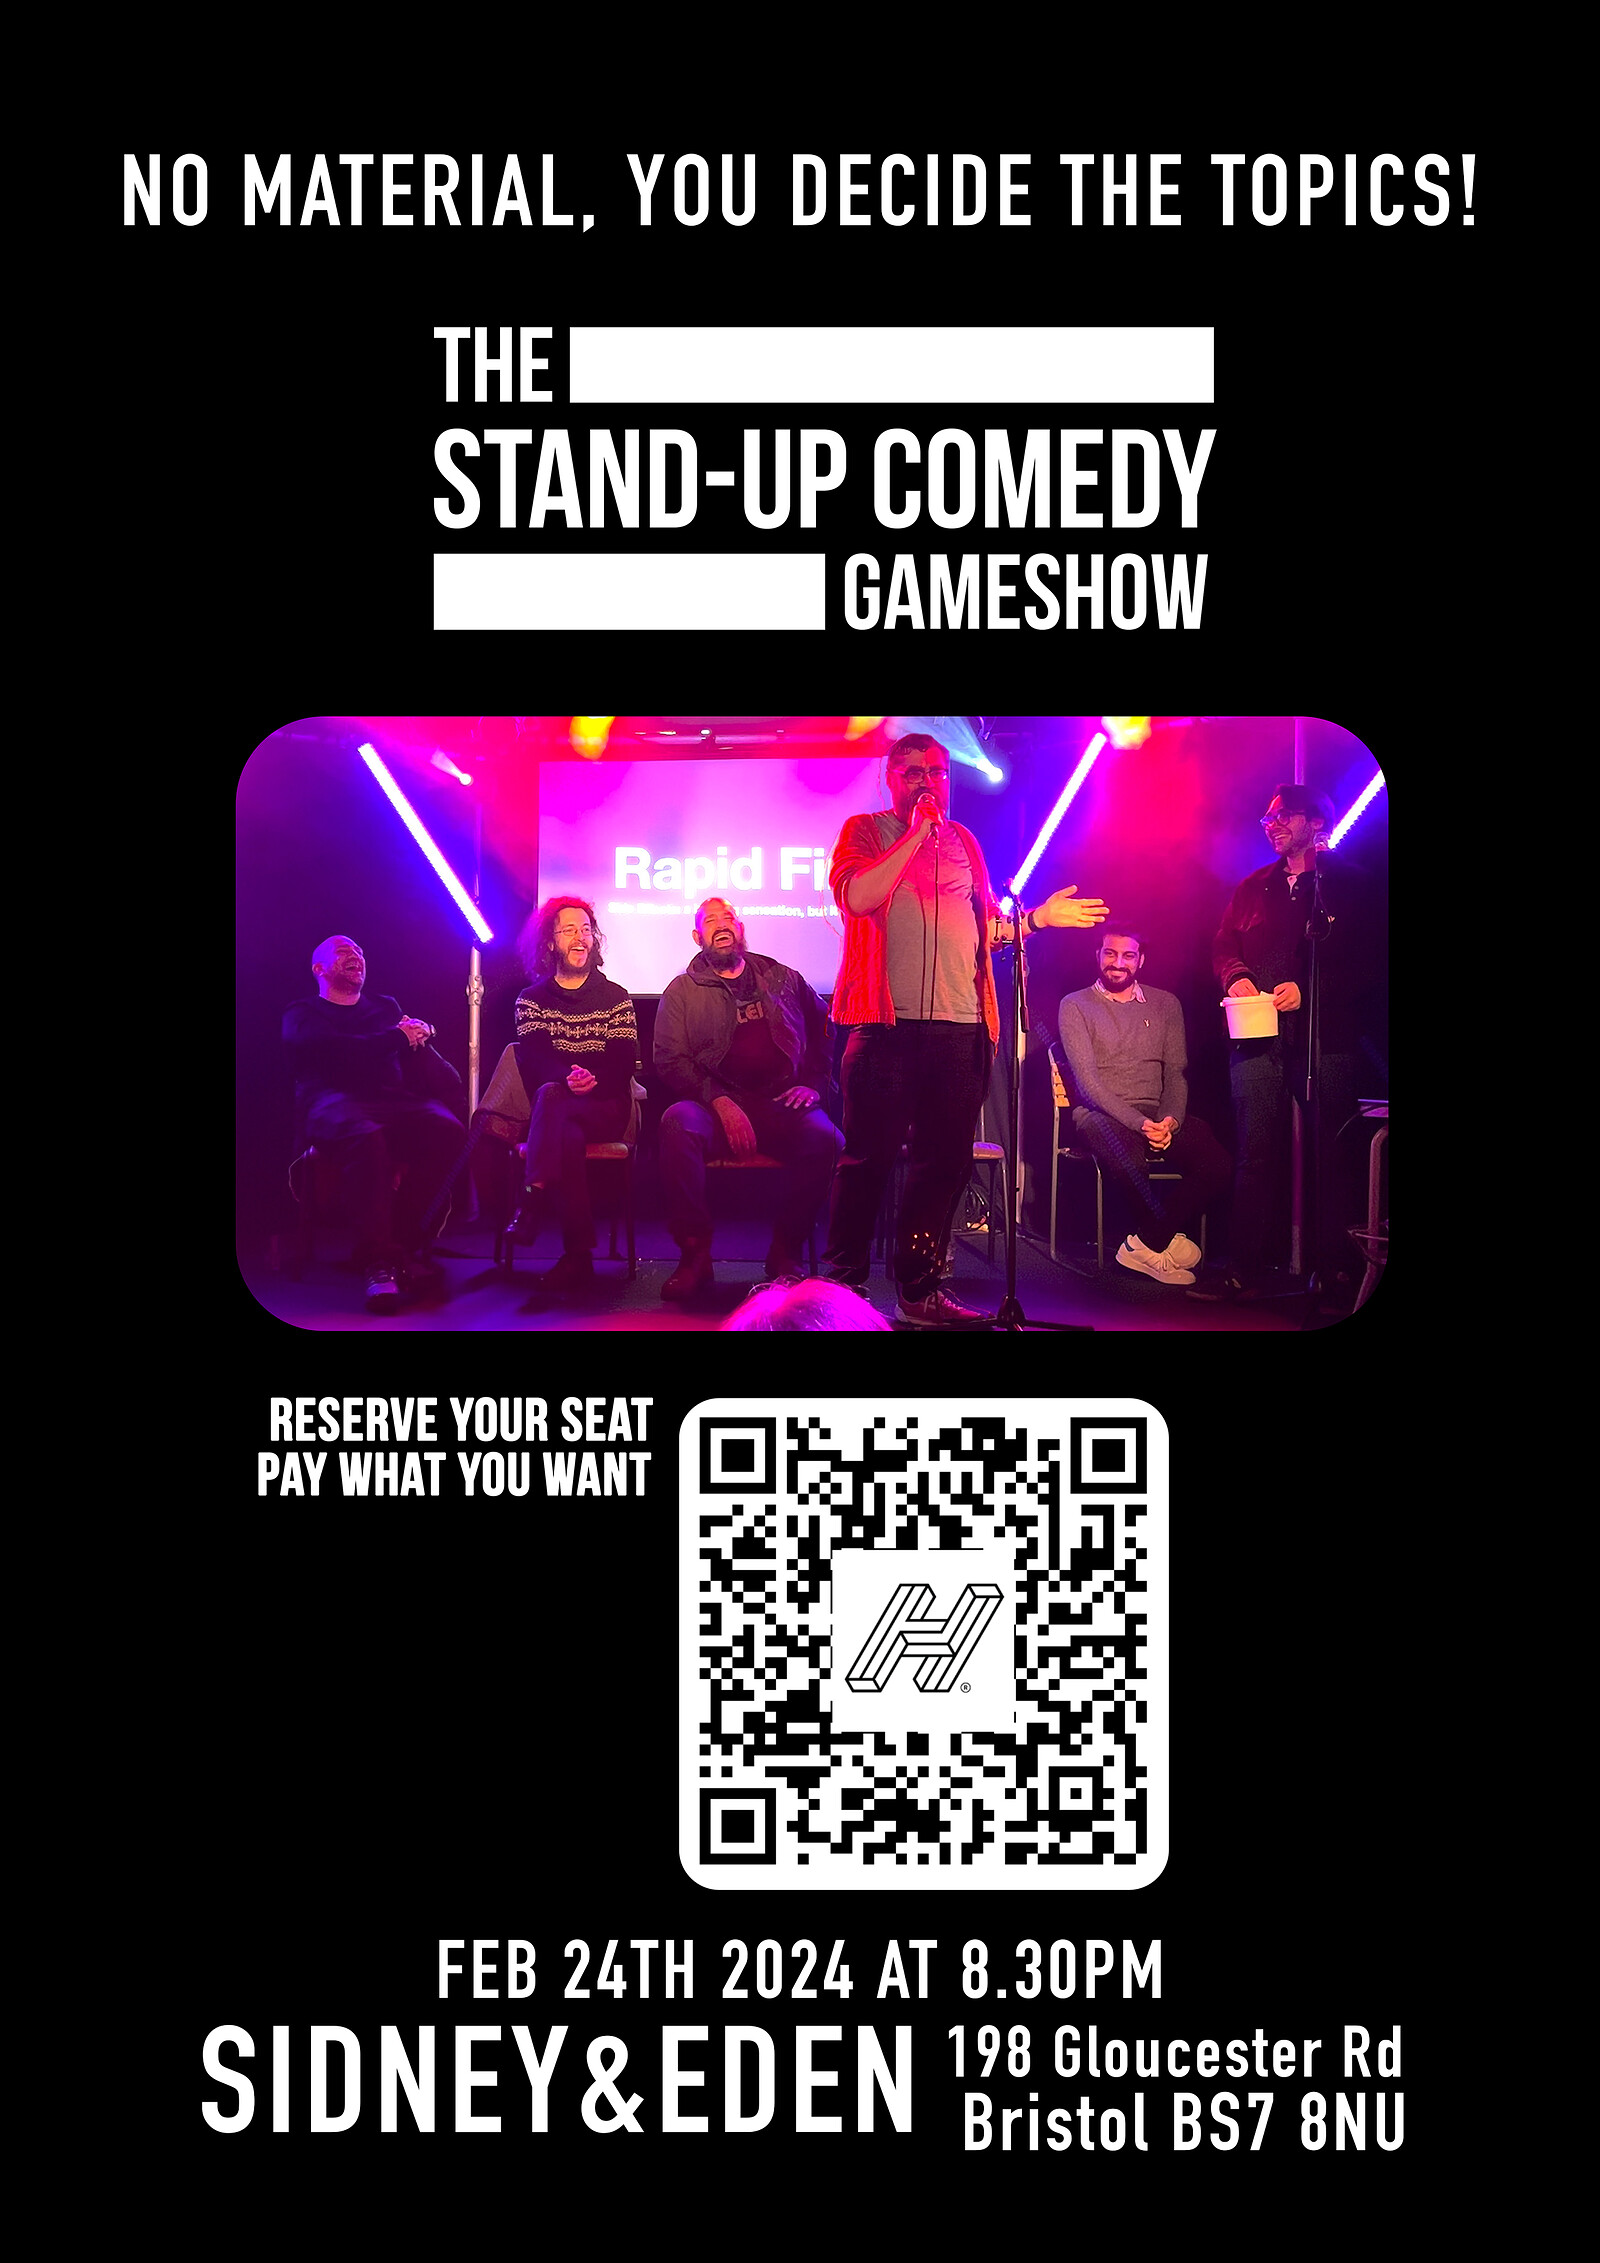 The Stand-Up Comedy Gameshow at Sidney & Eden